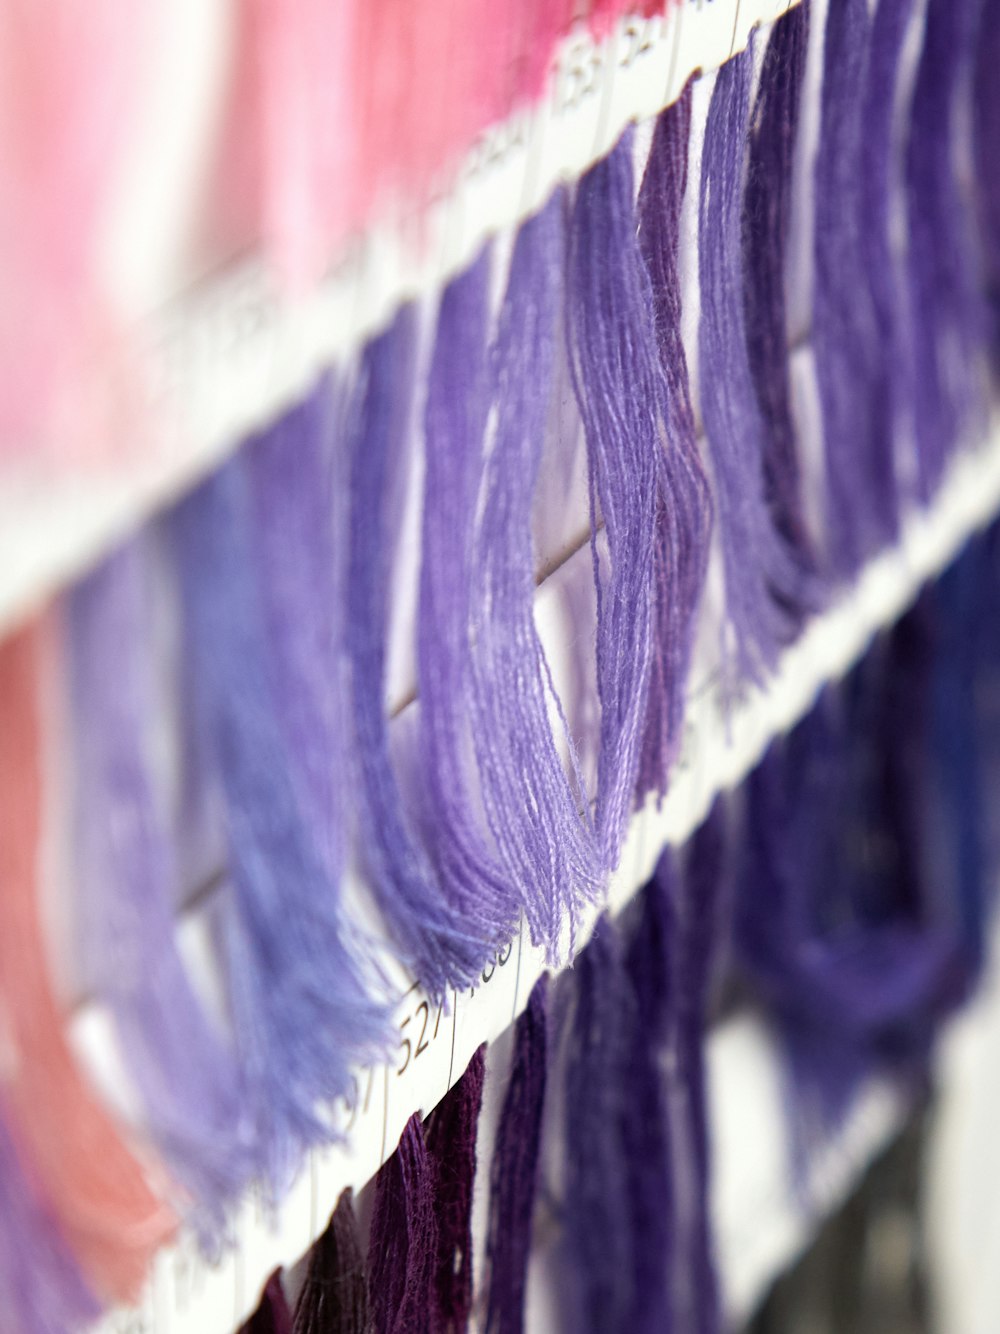 a close up of a row of different colored hair